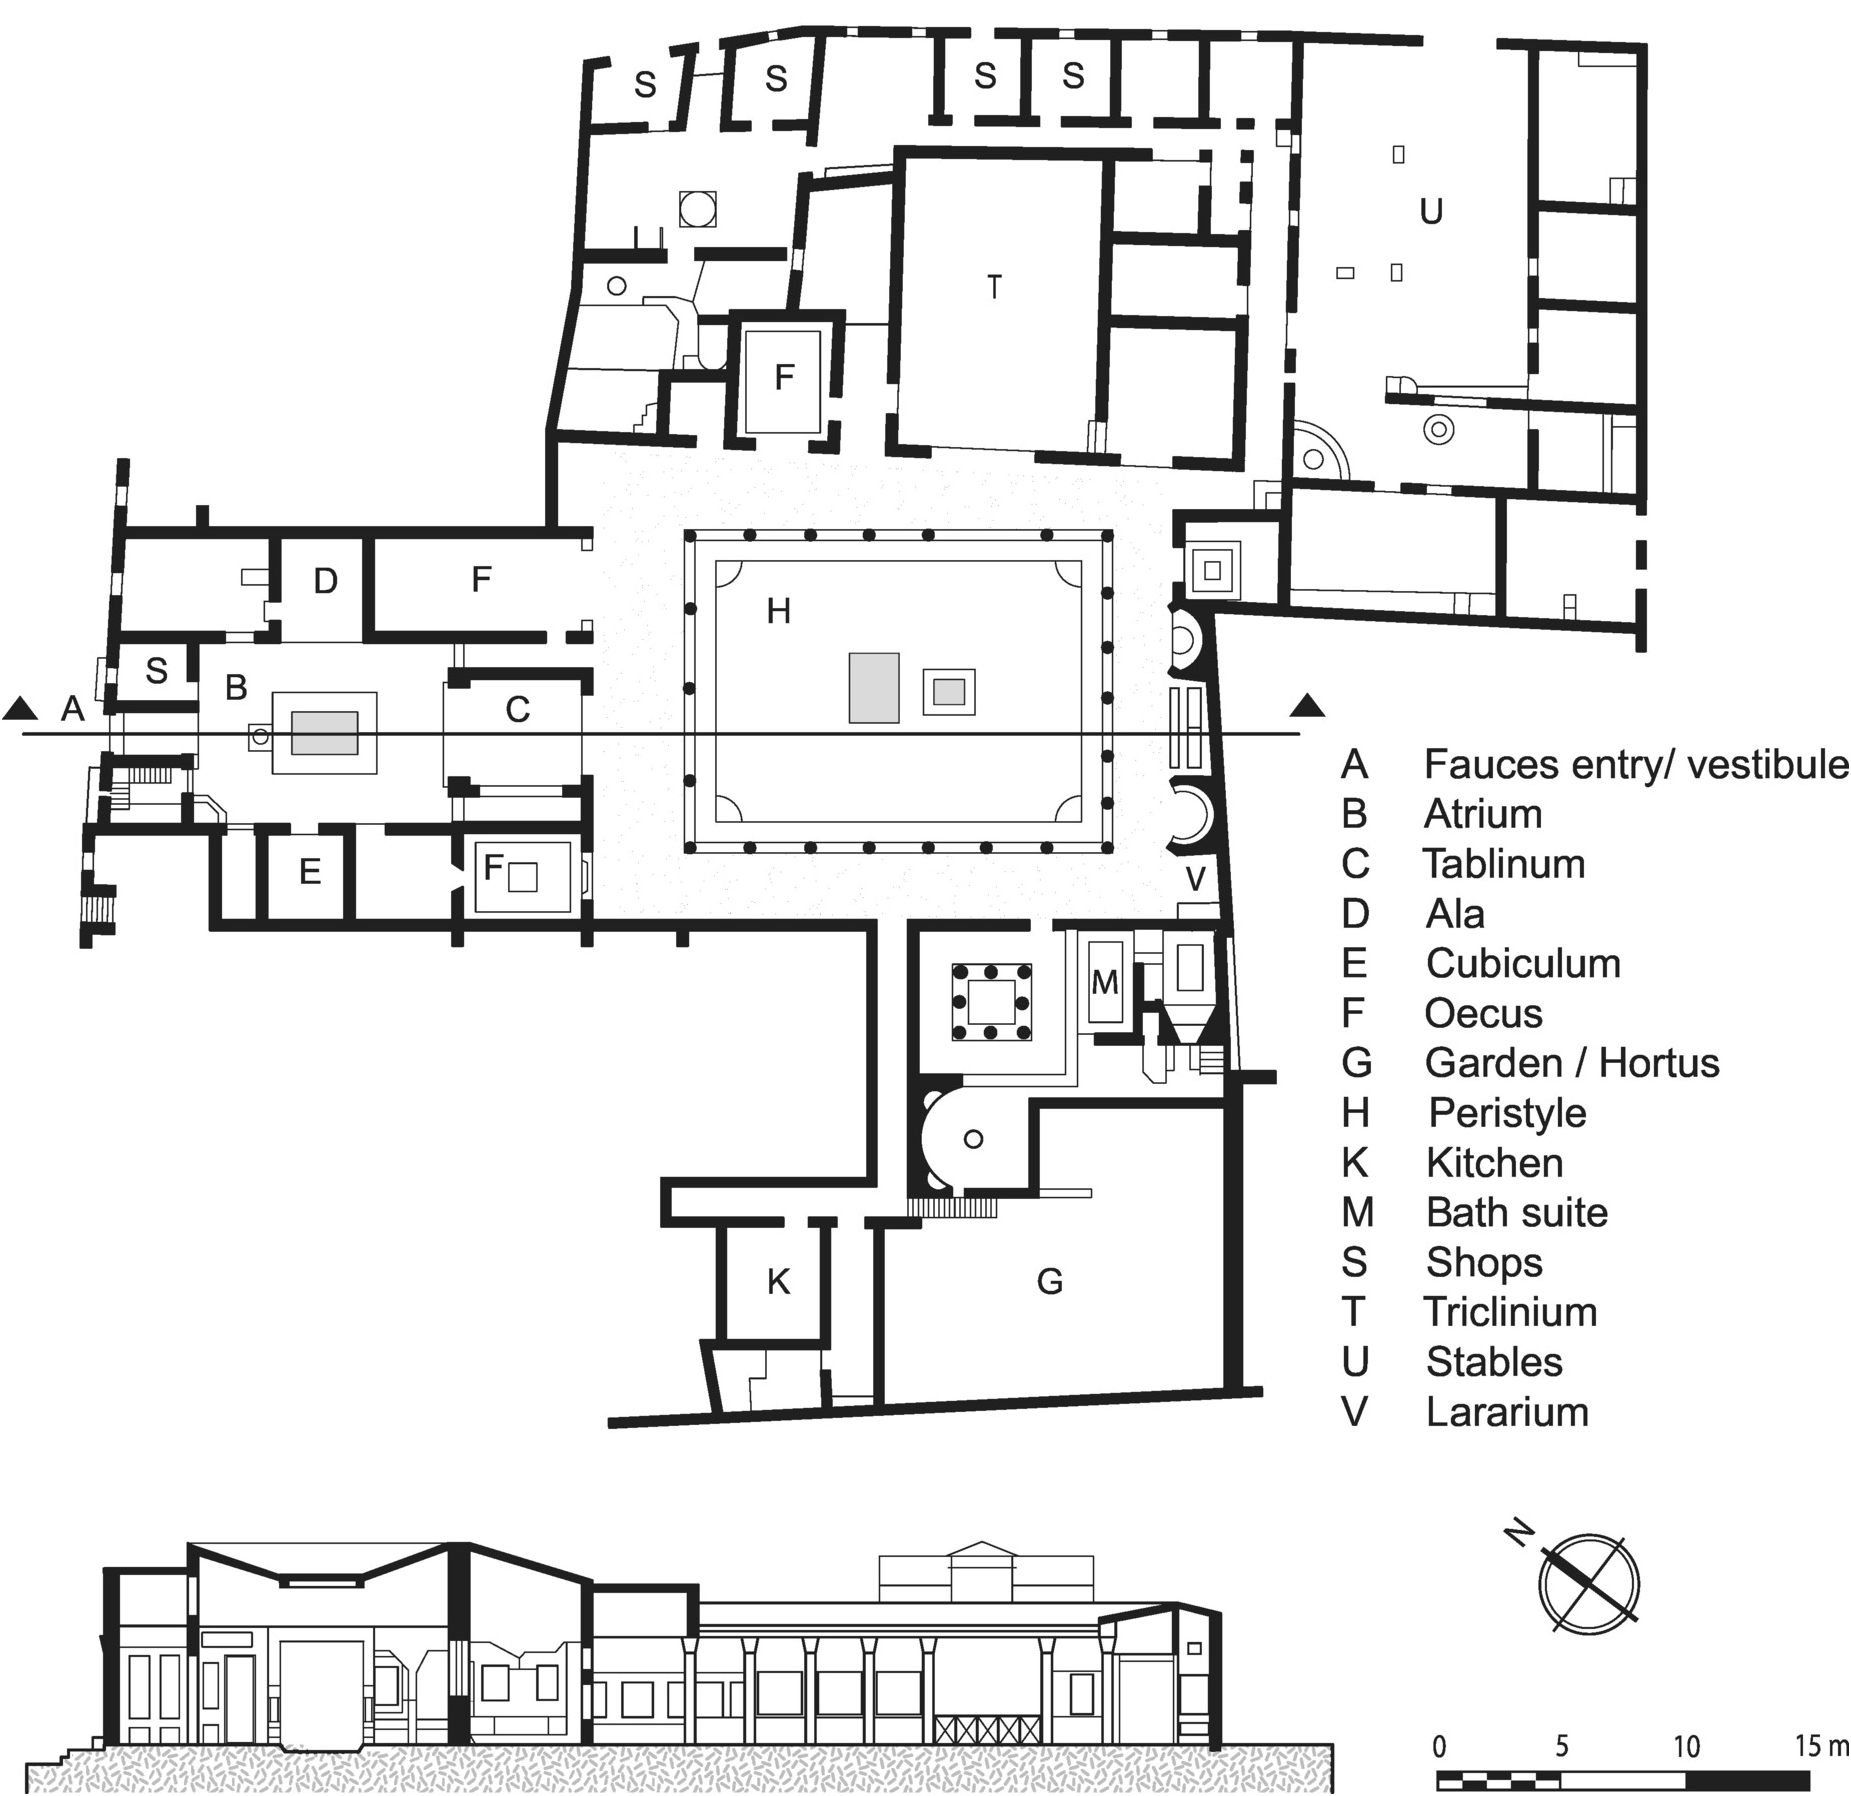 Residential Architecture Chapter 5 Roman Architecture And Urbanism